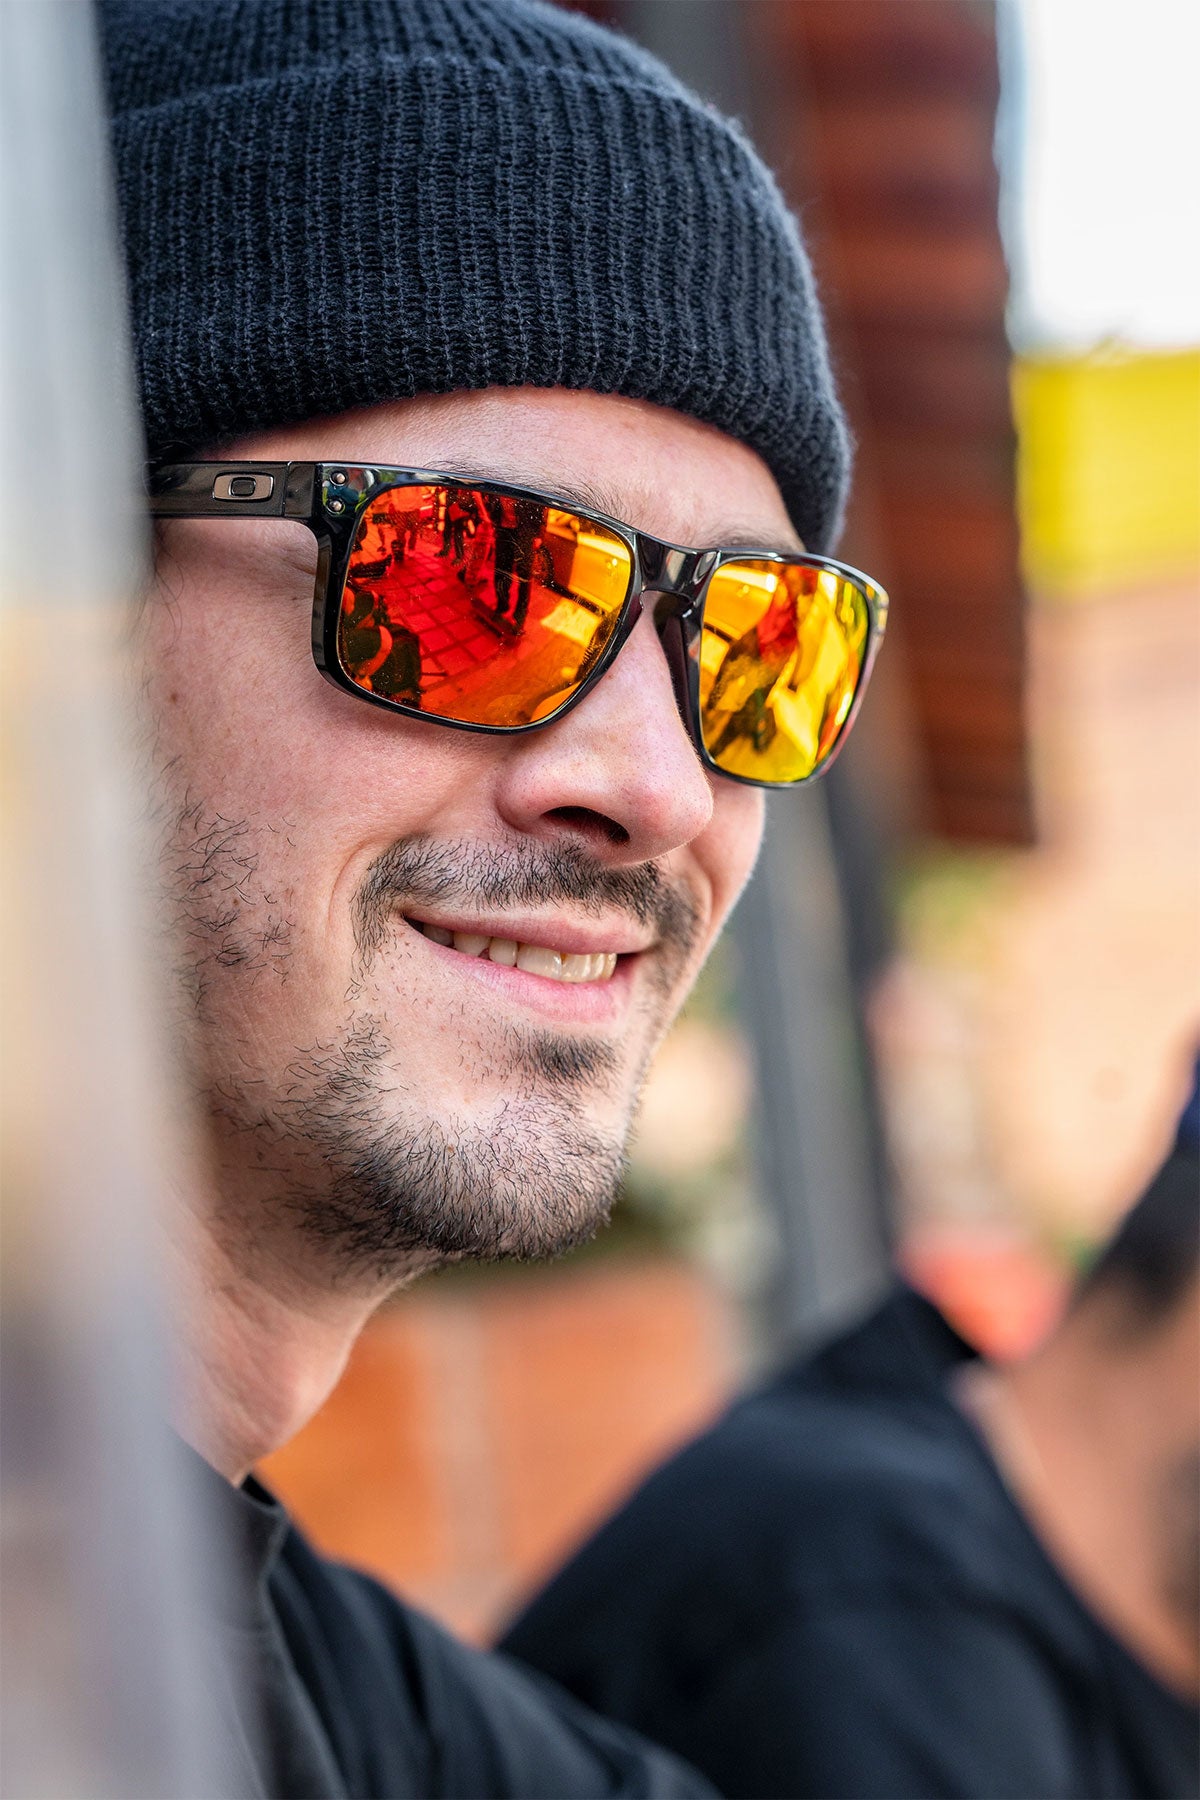 We tested it: The new Oakley Sunglasses